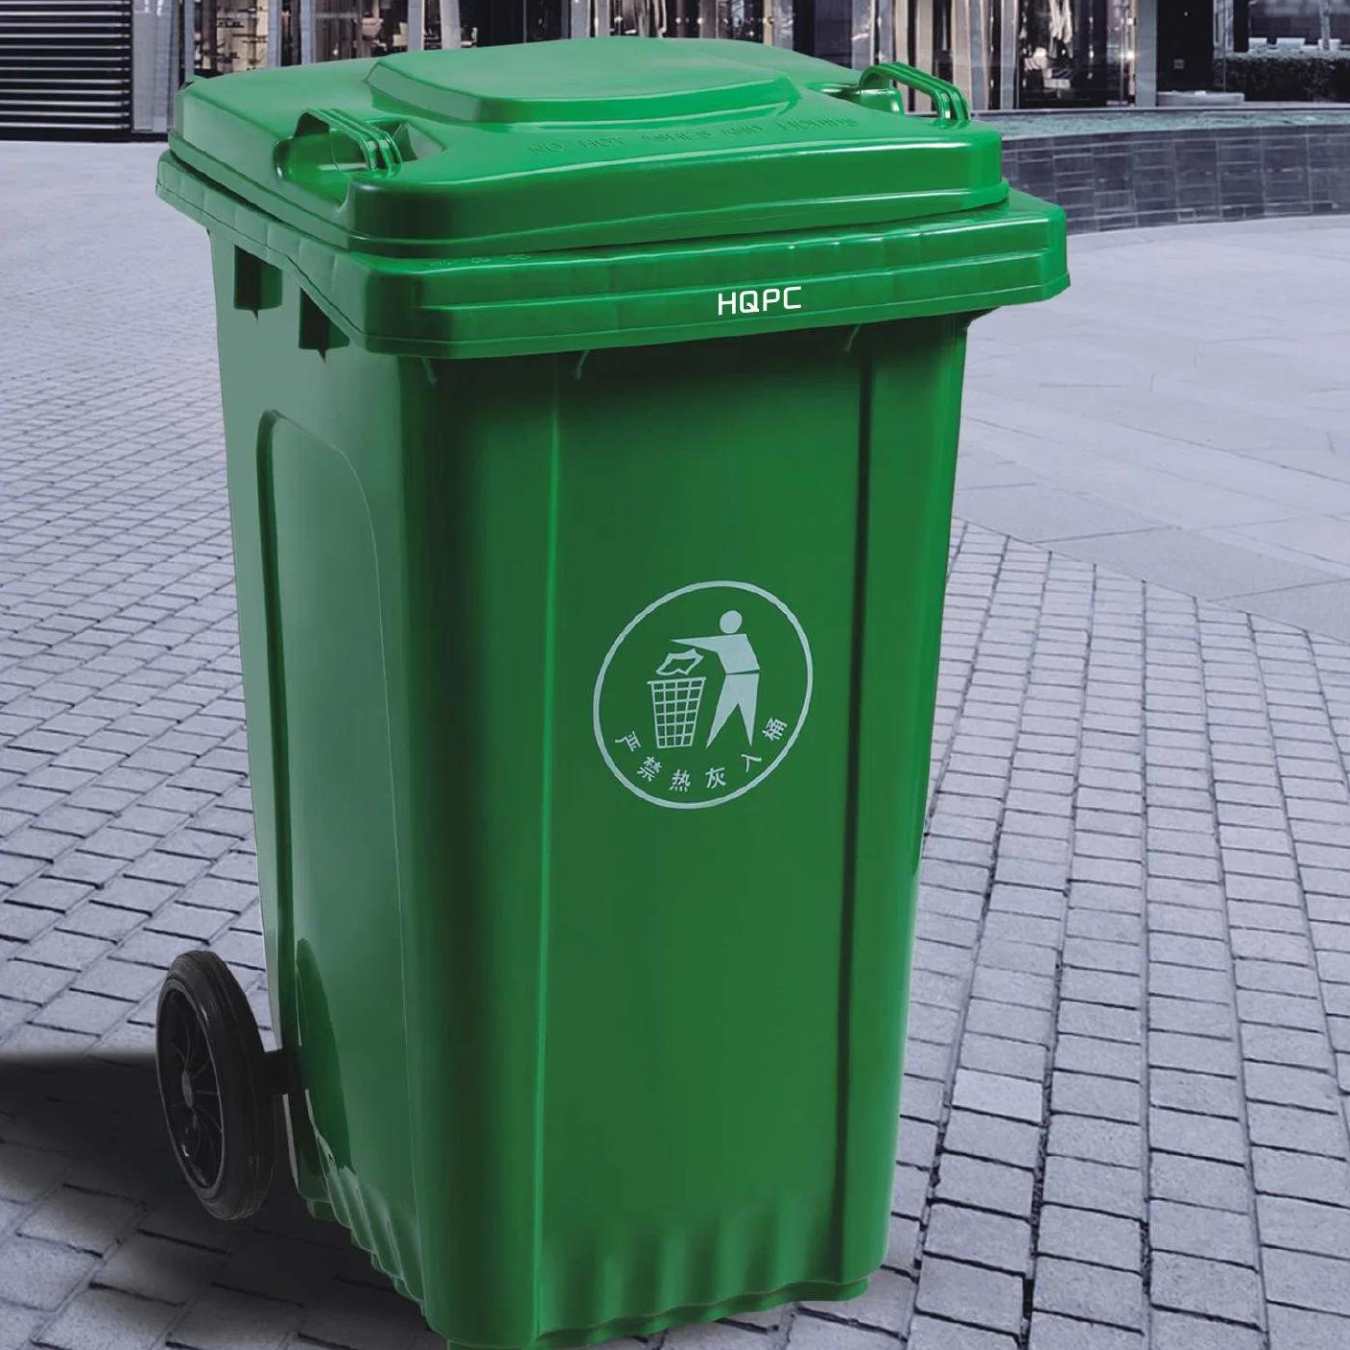 What Is The Green Trash Can Called